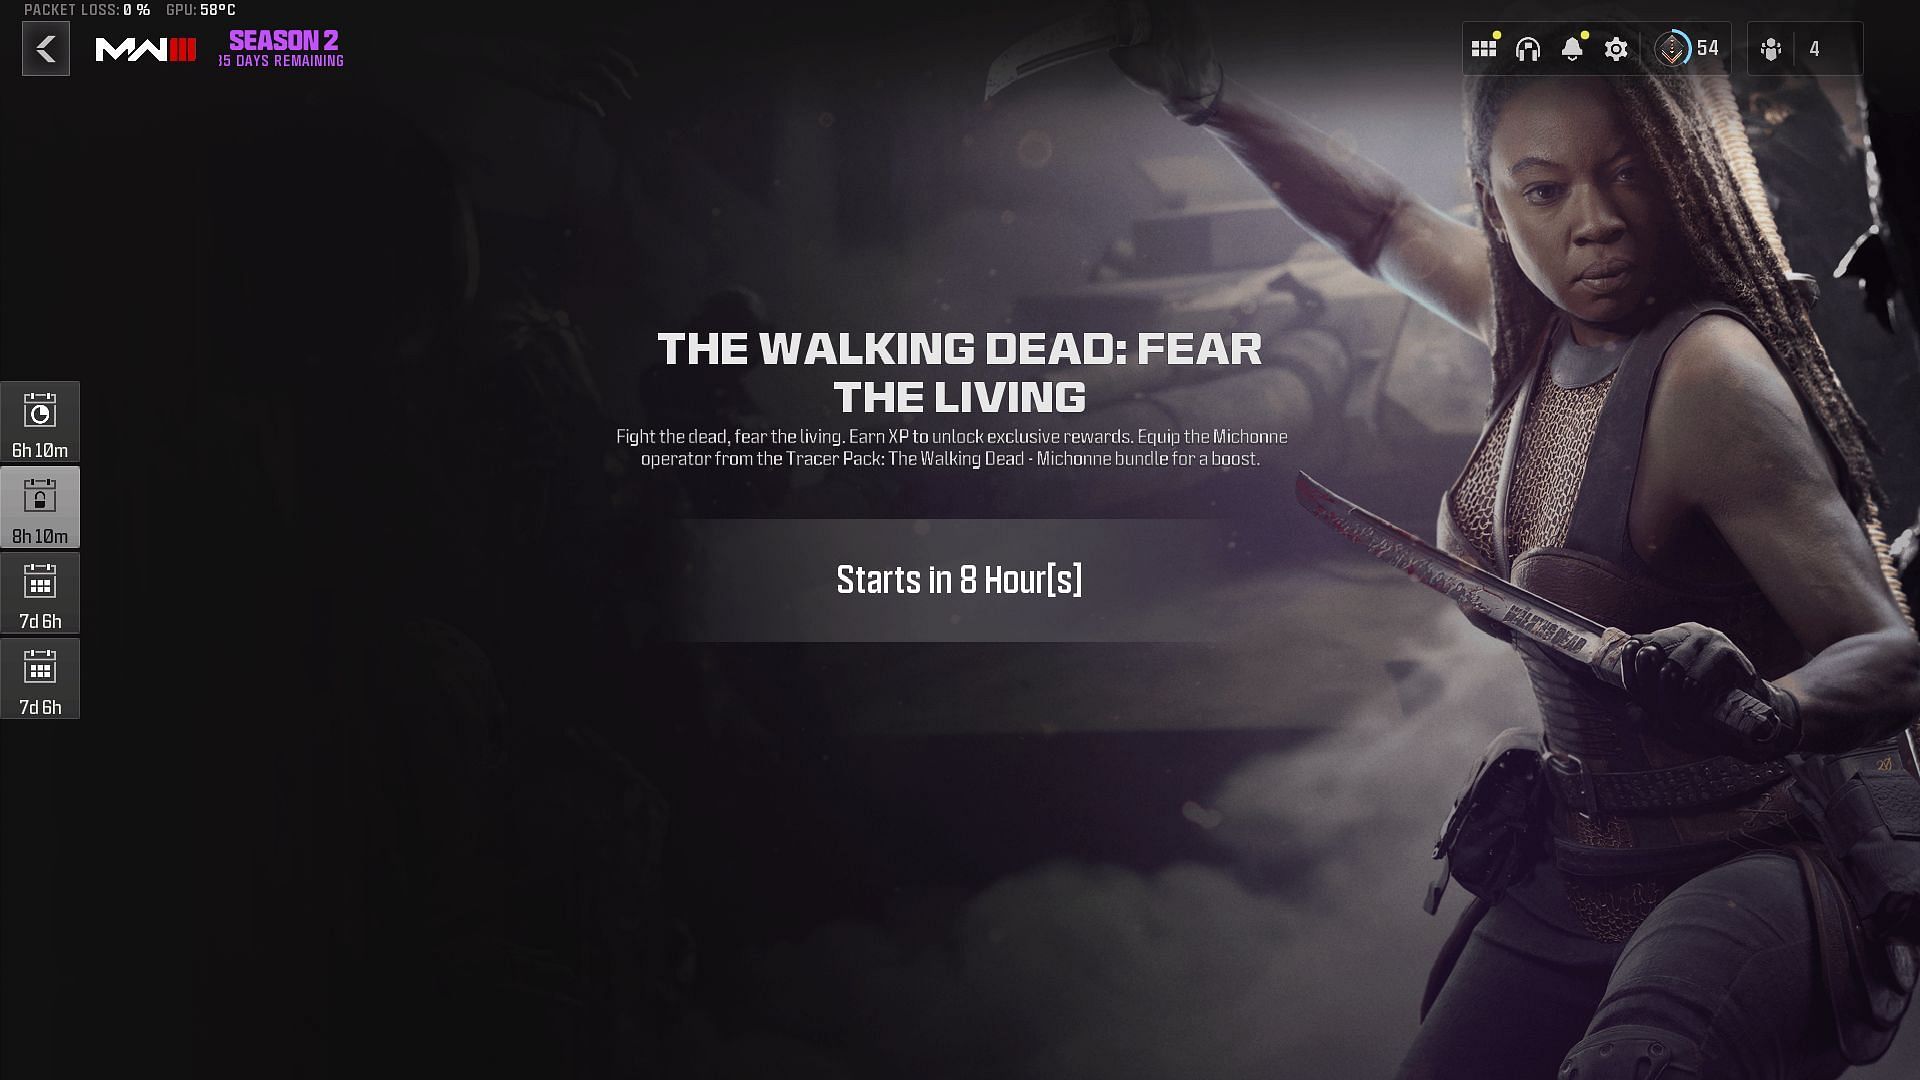 The Walking Dead Fear the Living countdown (Image via Activision)